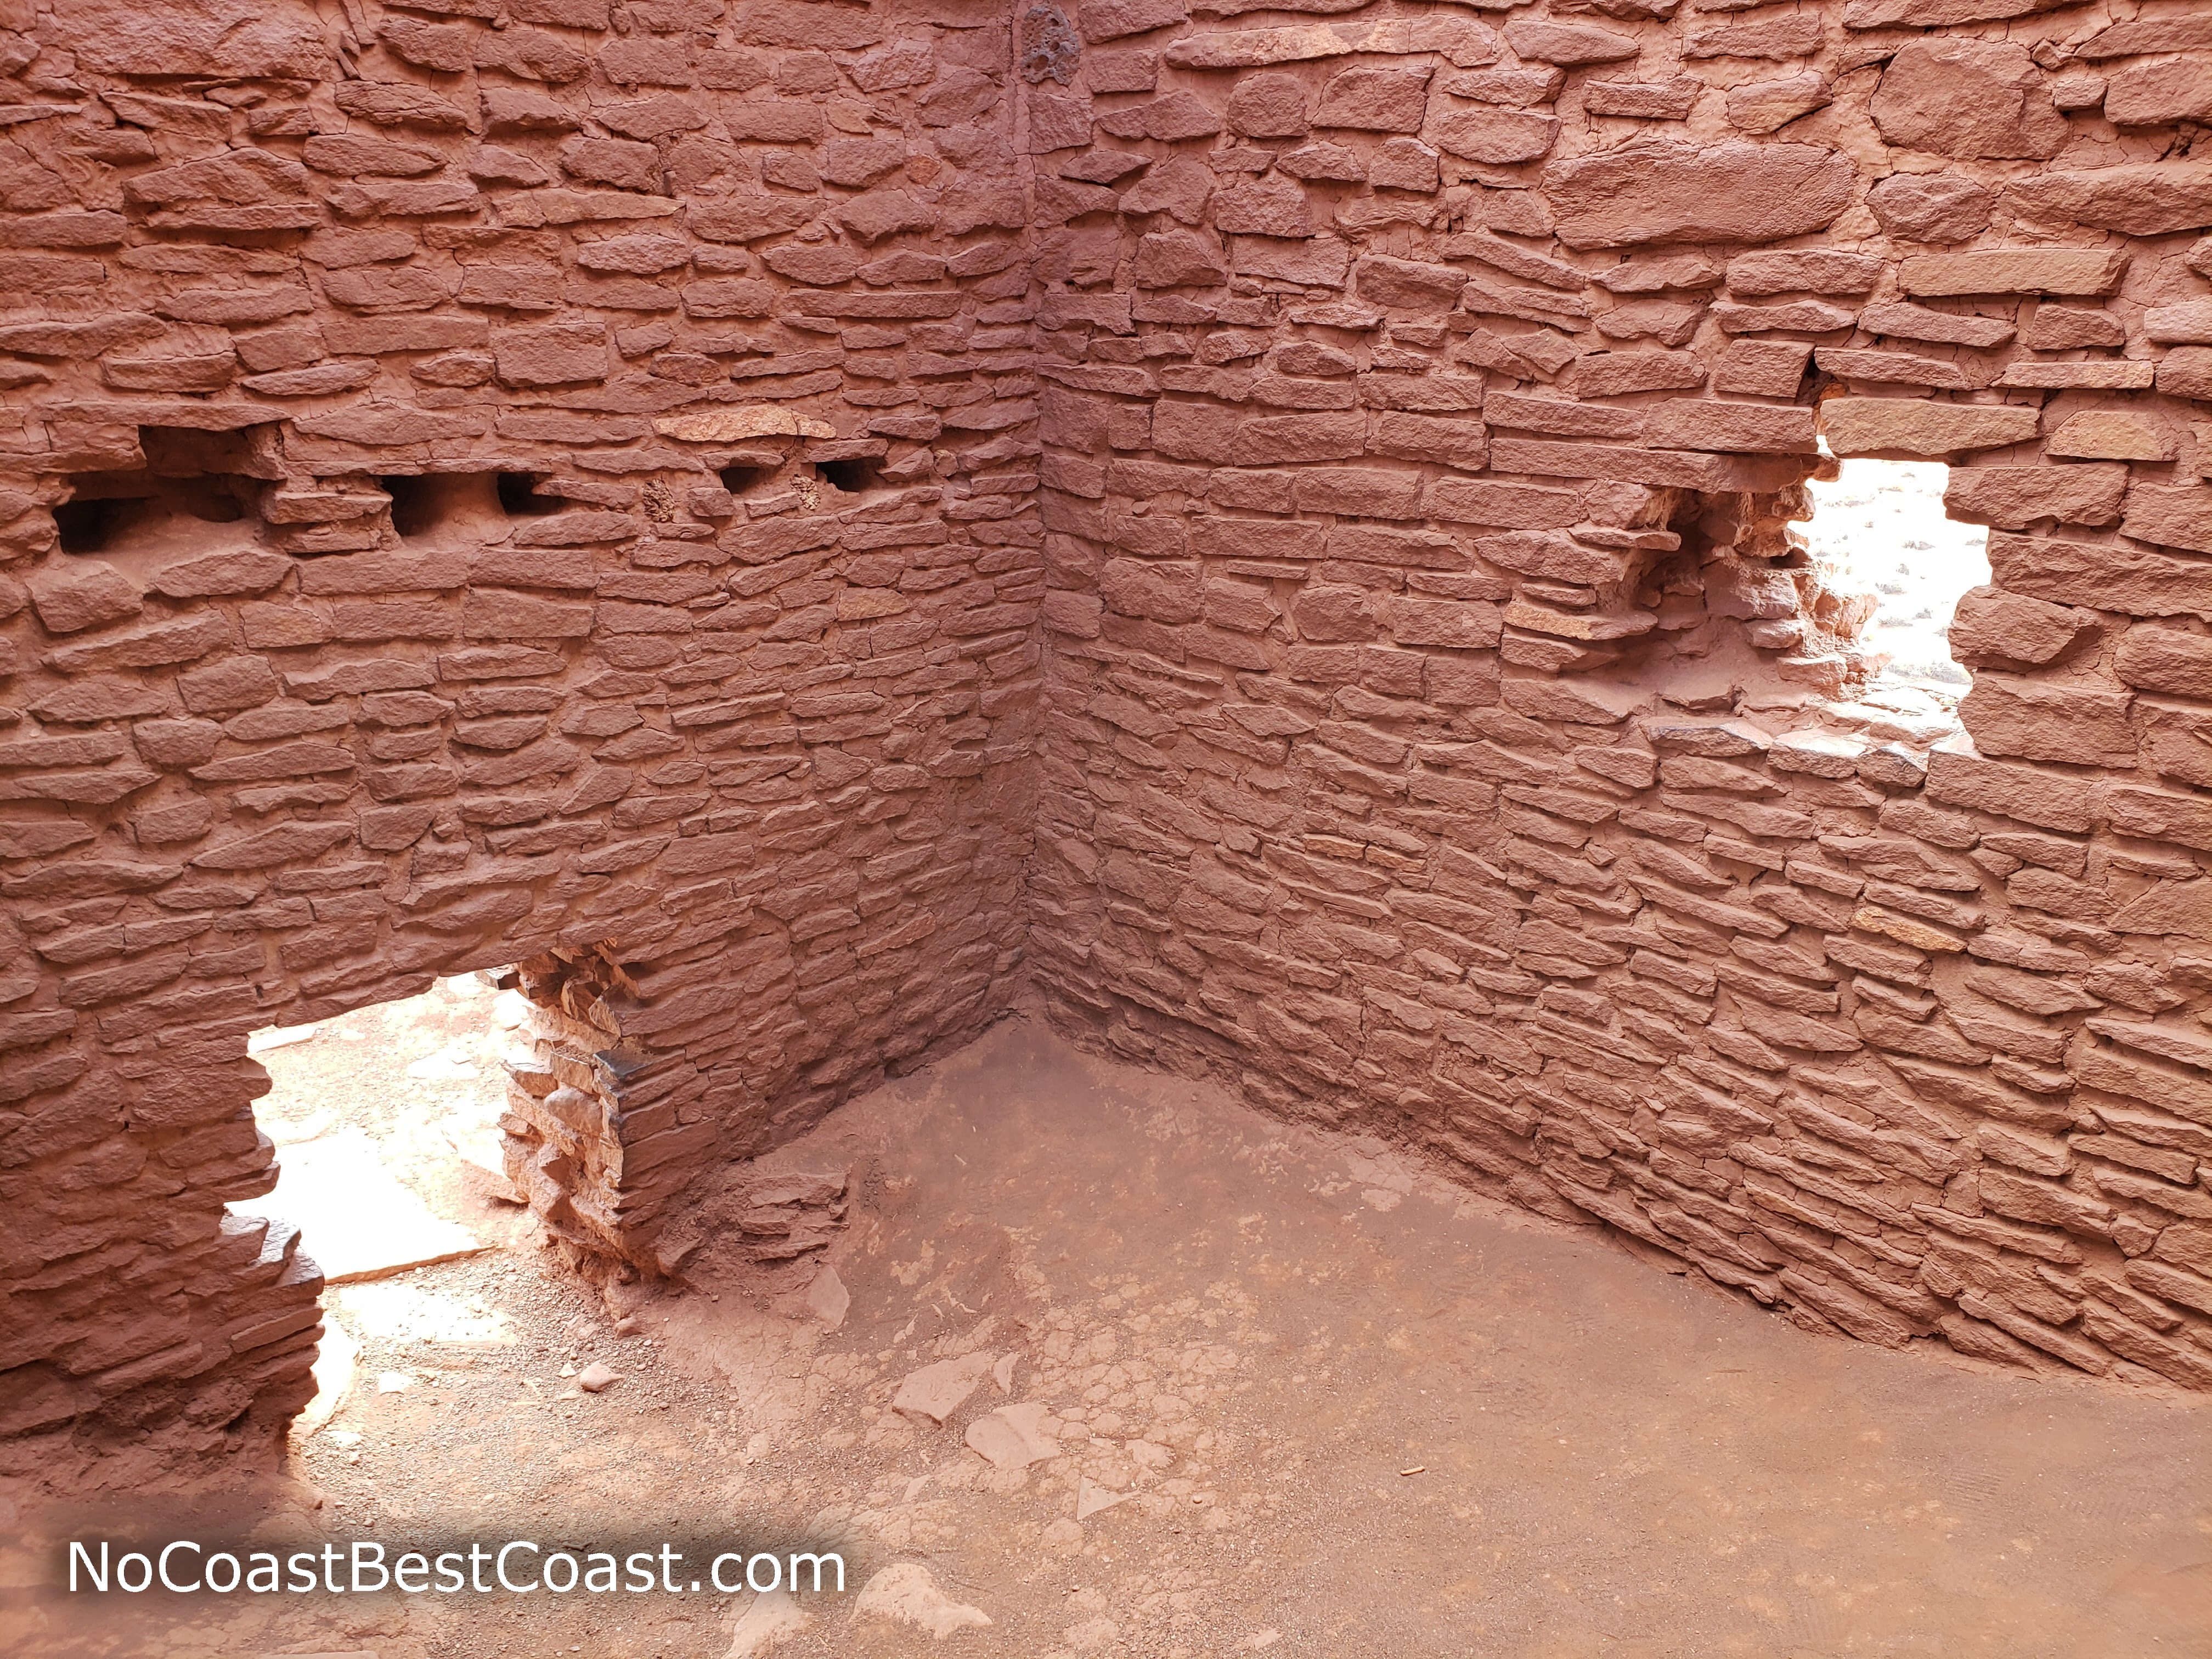 The stone walls of Wukoki Pueblo as seen from the inside of one of the rooms